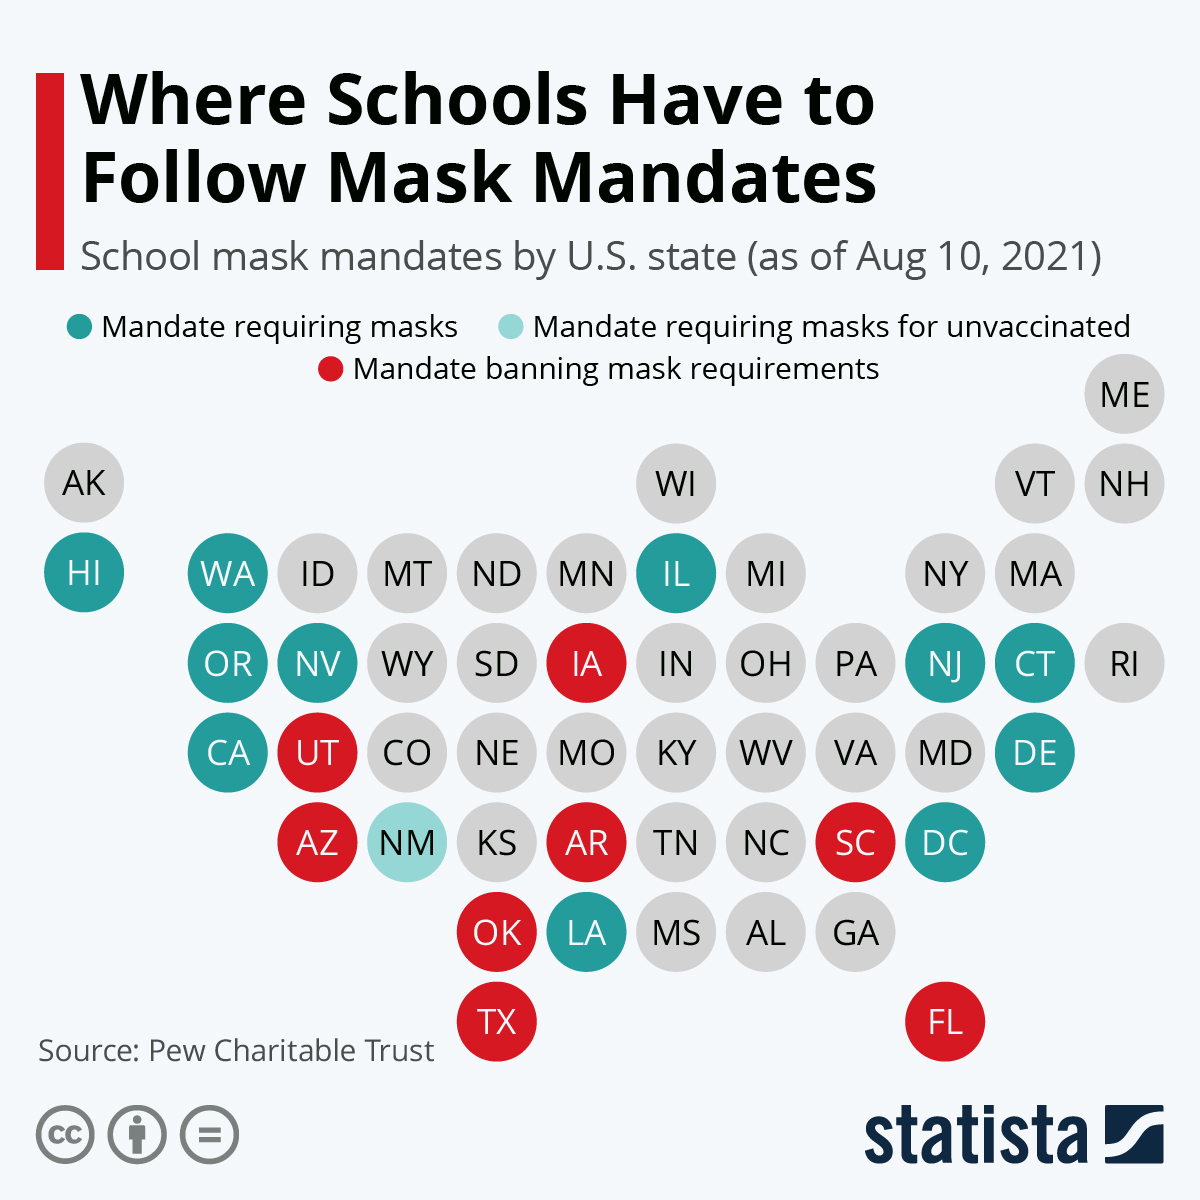 Where Schools Have to Follow Mask Mandates